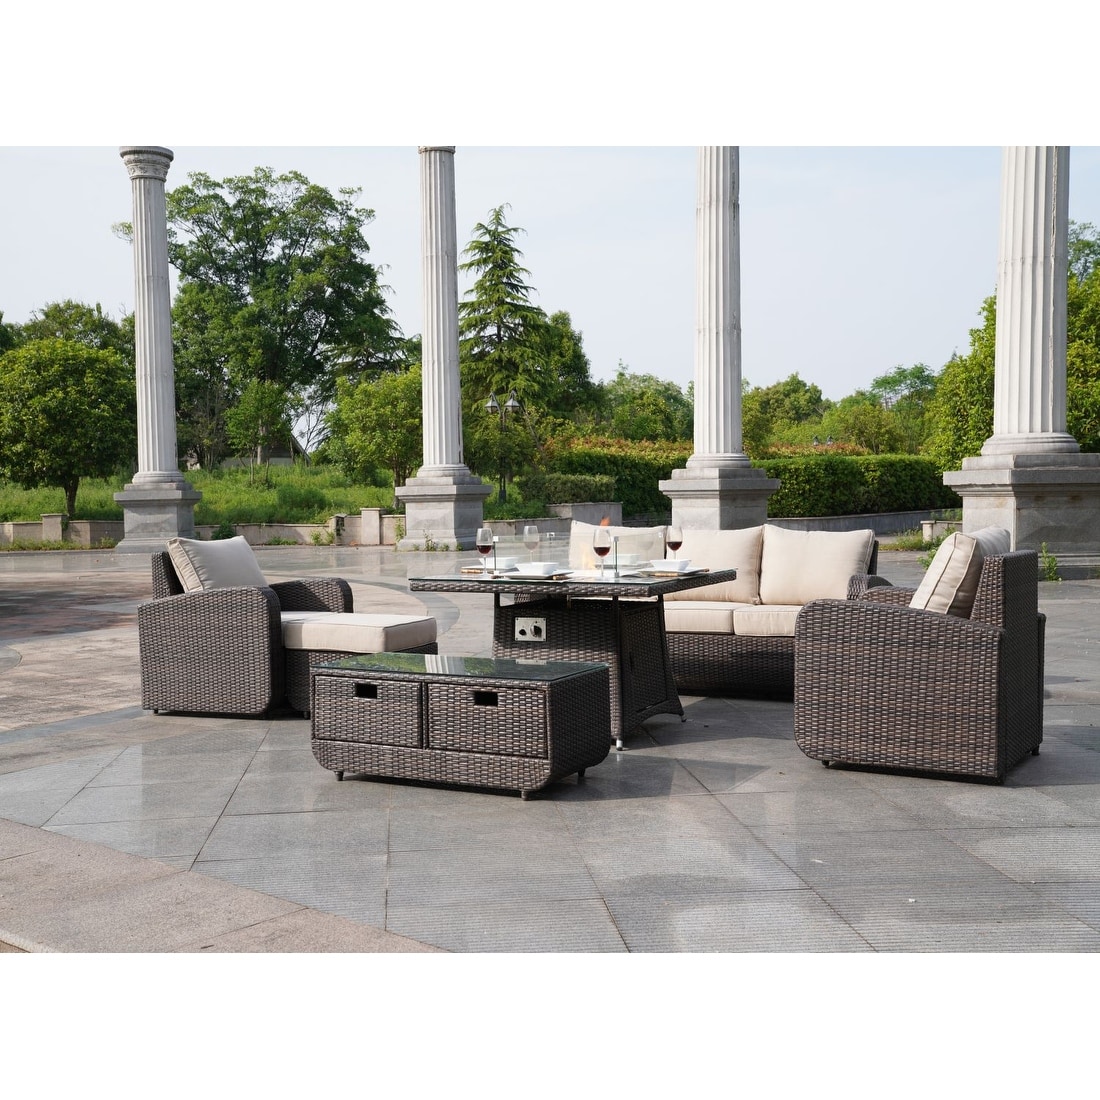 6pcs Wicker Patio Sofa Set Outdoor Chat Sets With Fir Pit Table With Drawer Table By Moda Furnishings